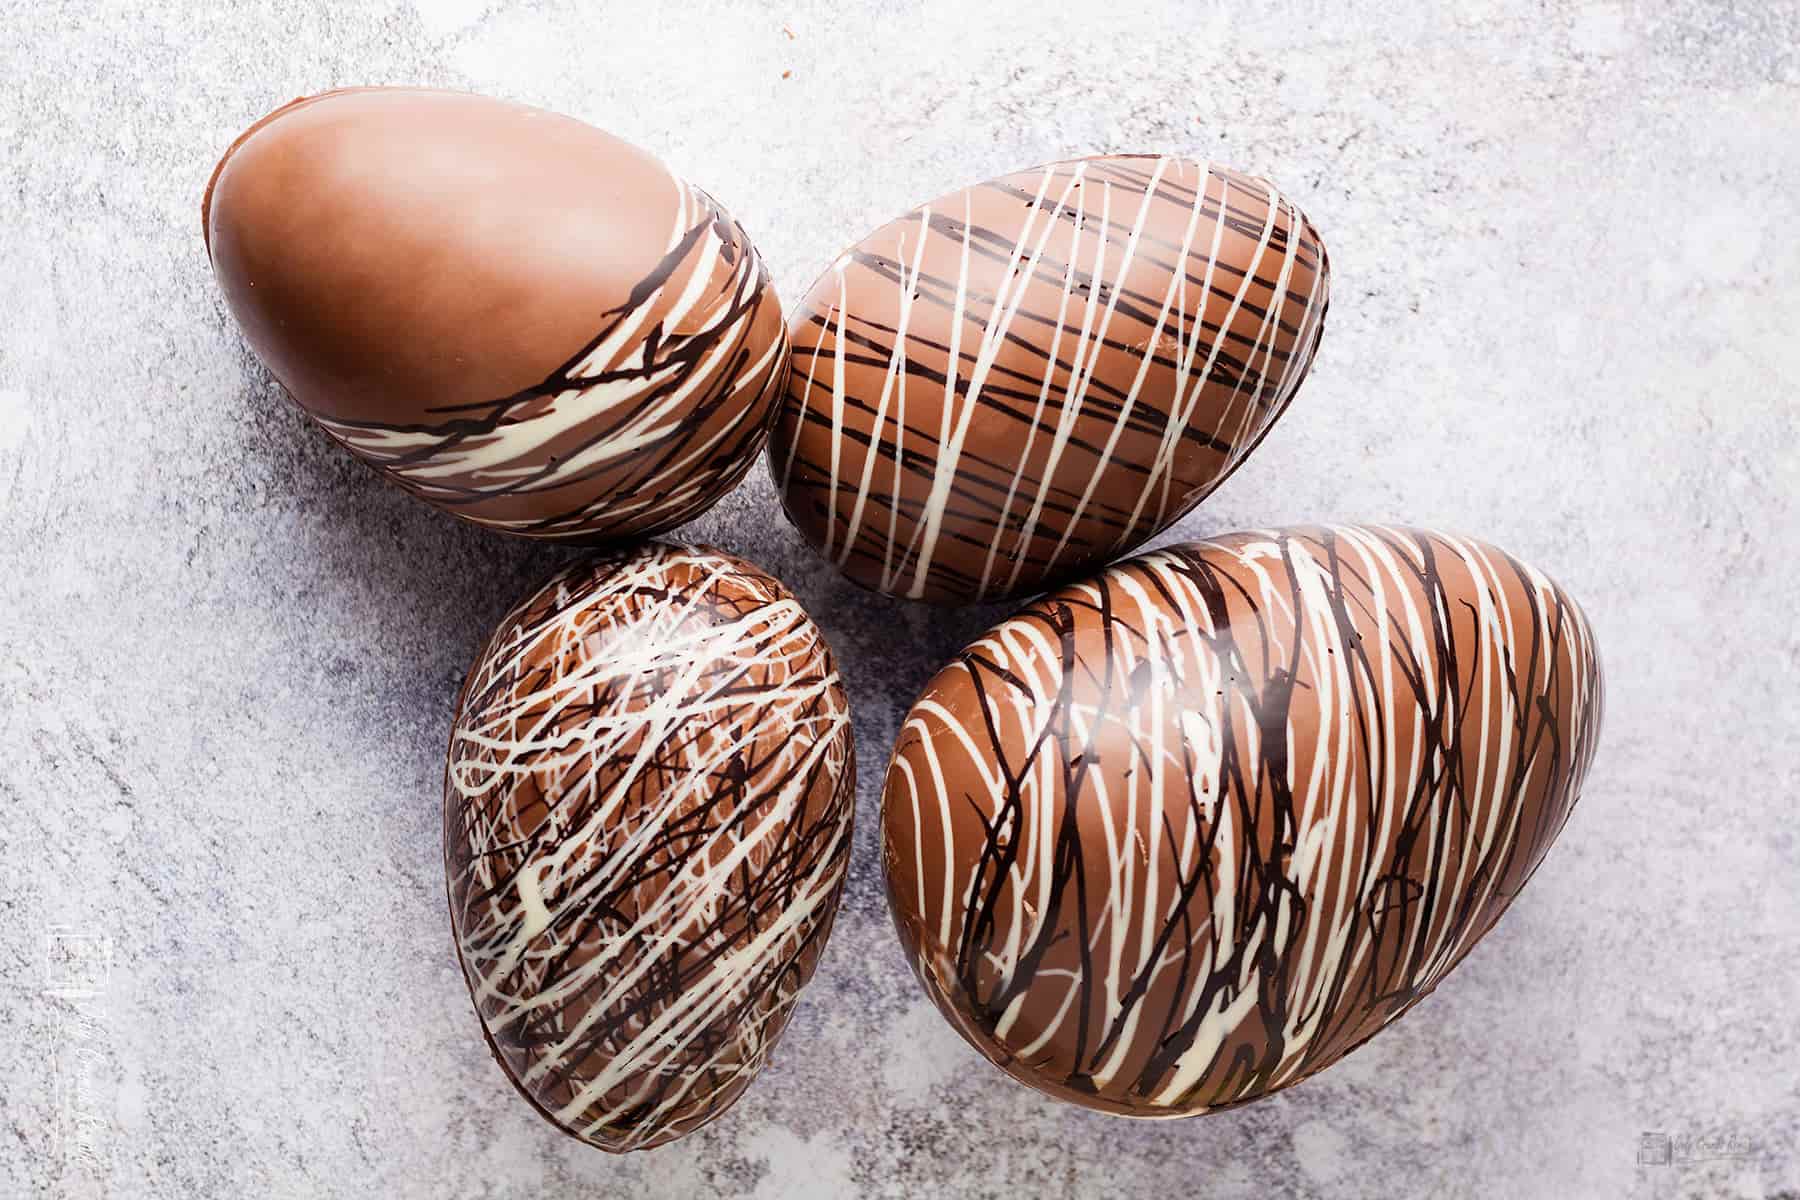 How to Make Easter Eggs 